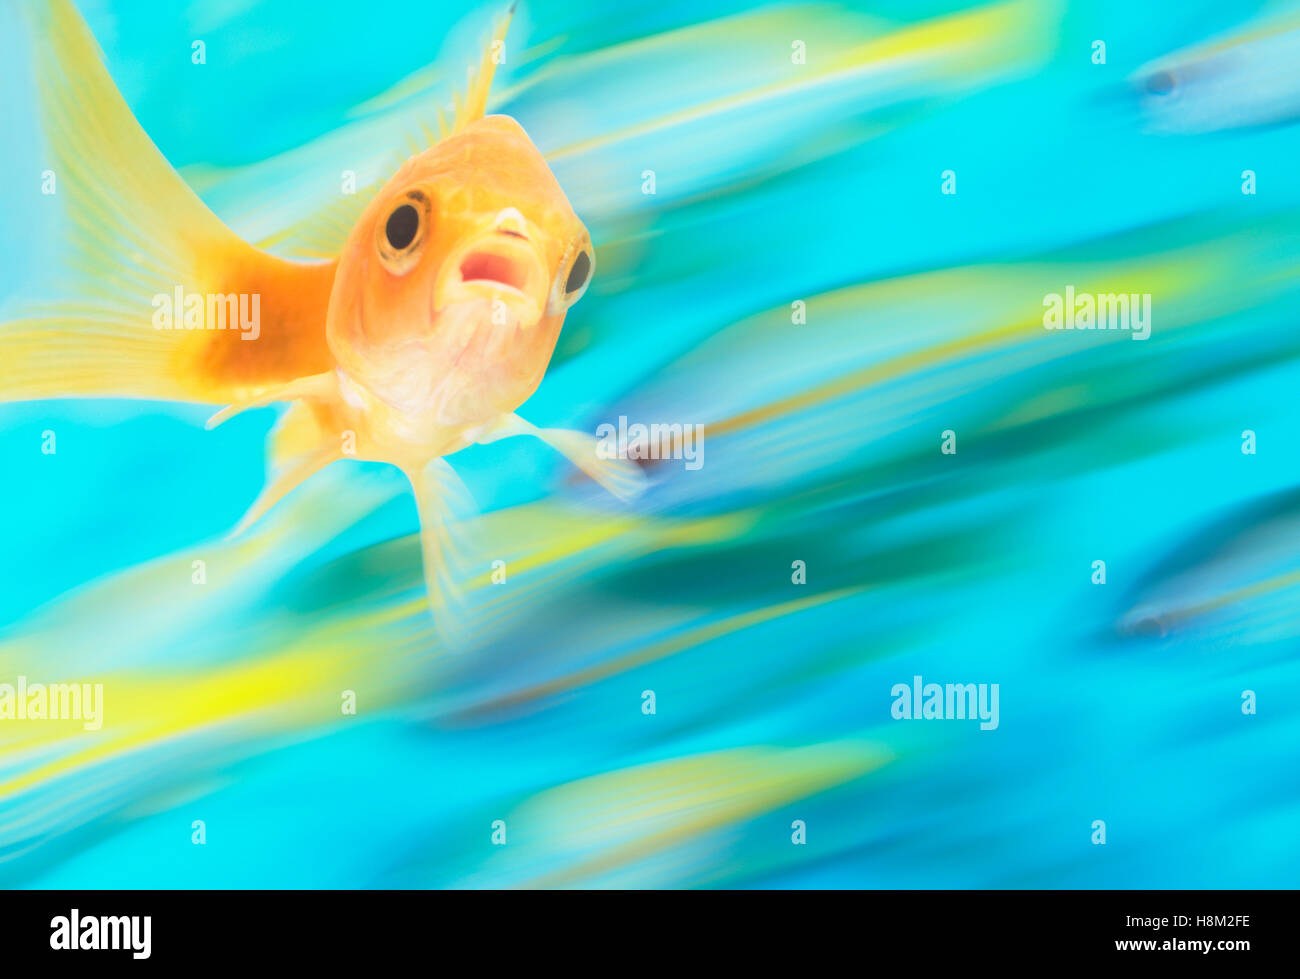 Gold fish with school of fish in motion in background, digital composite Stock Photo